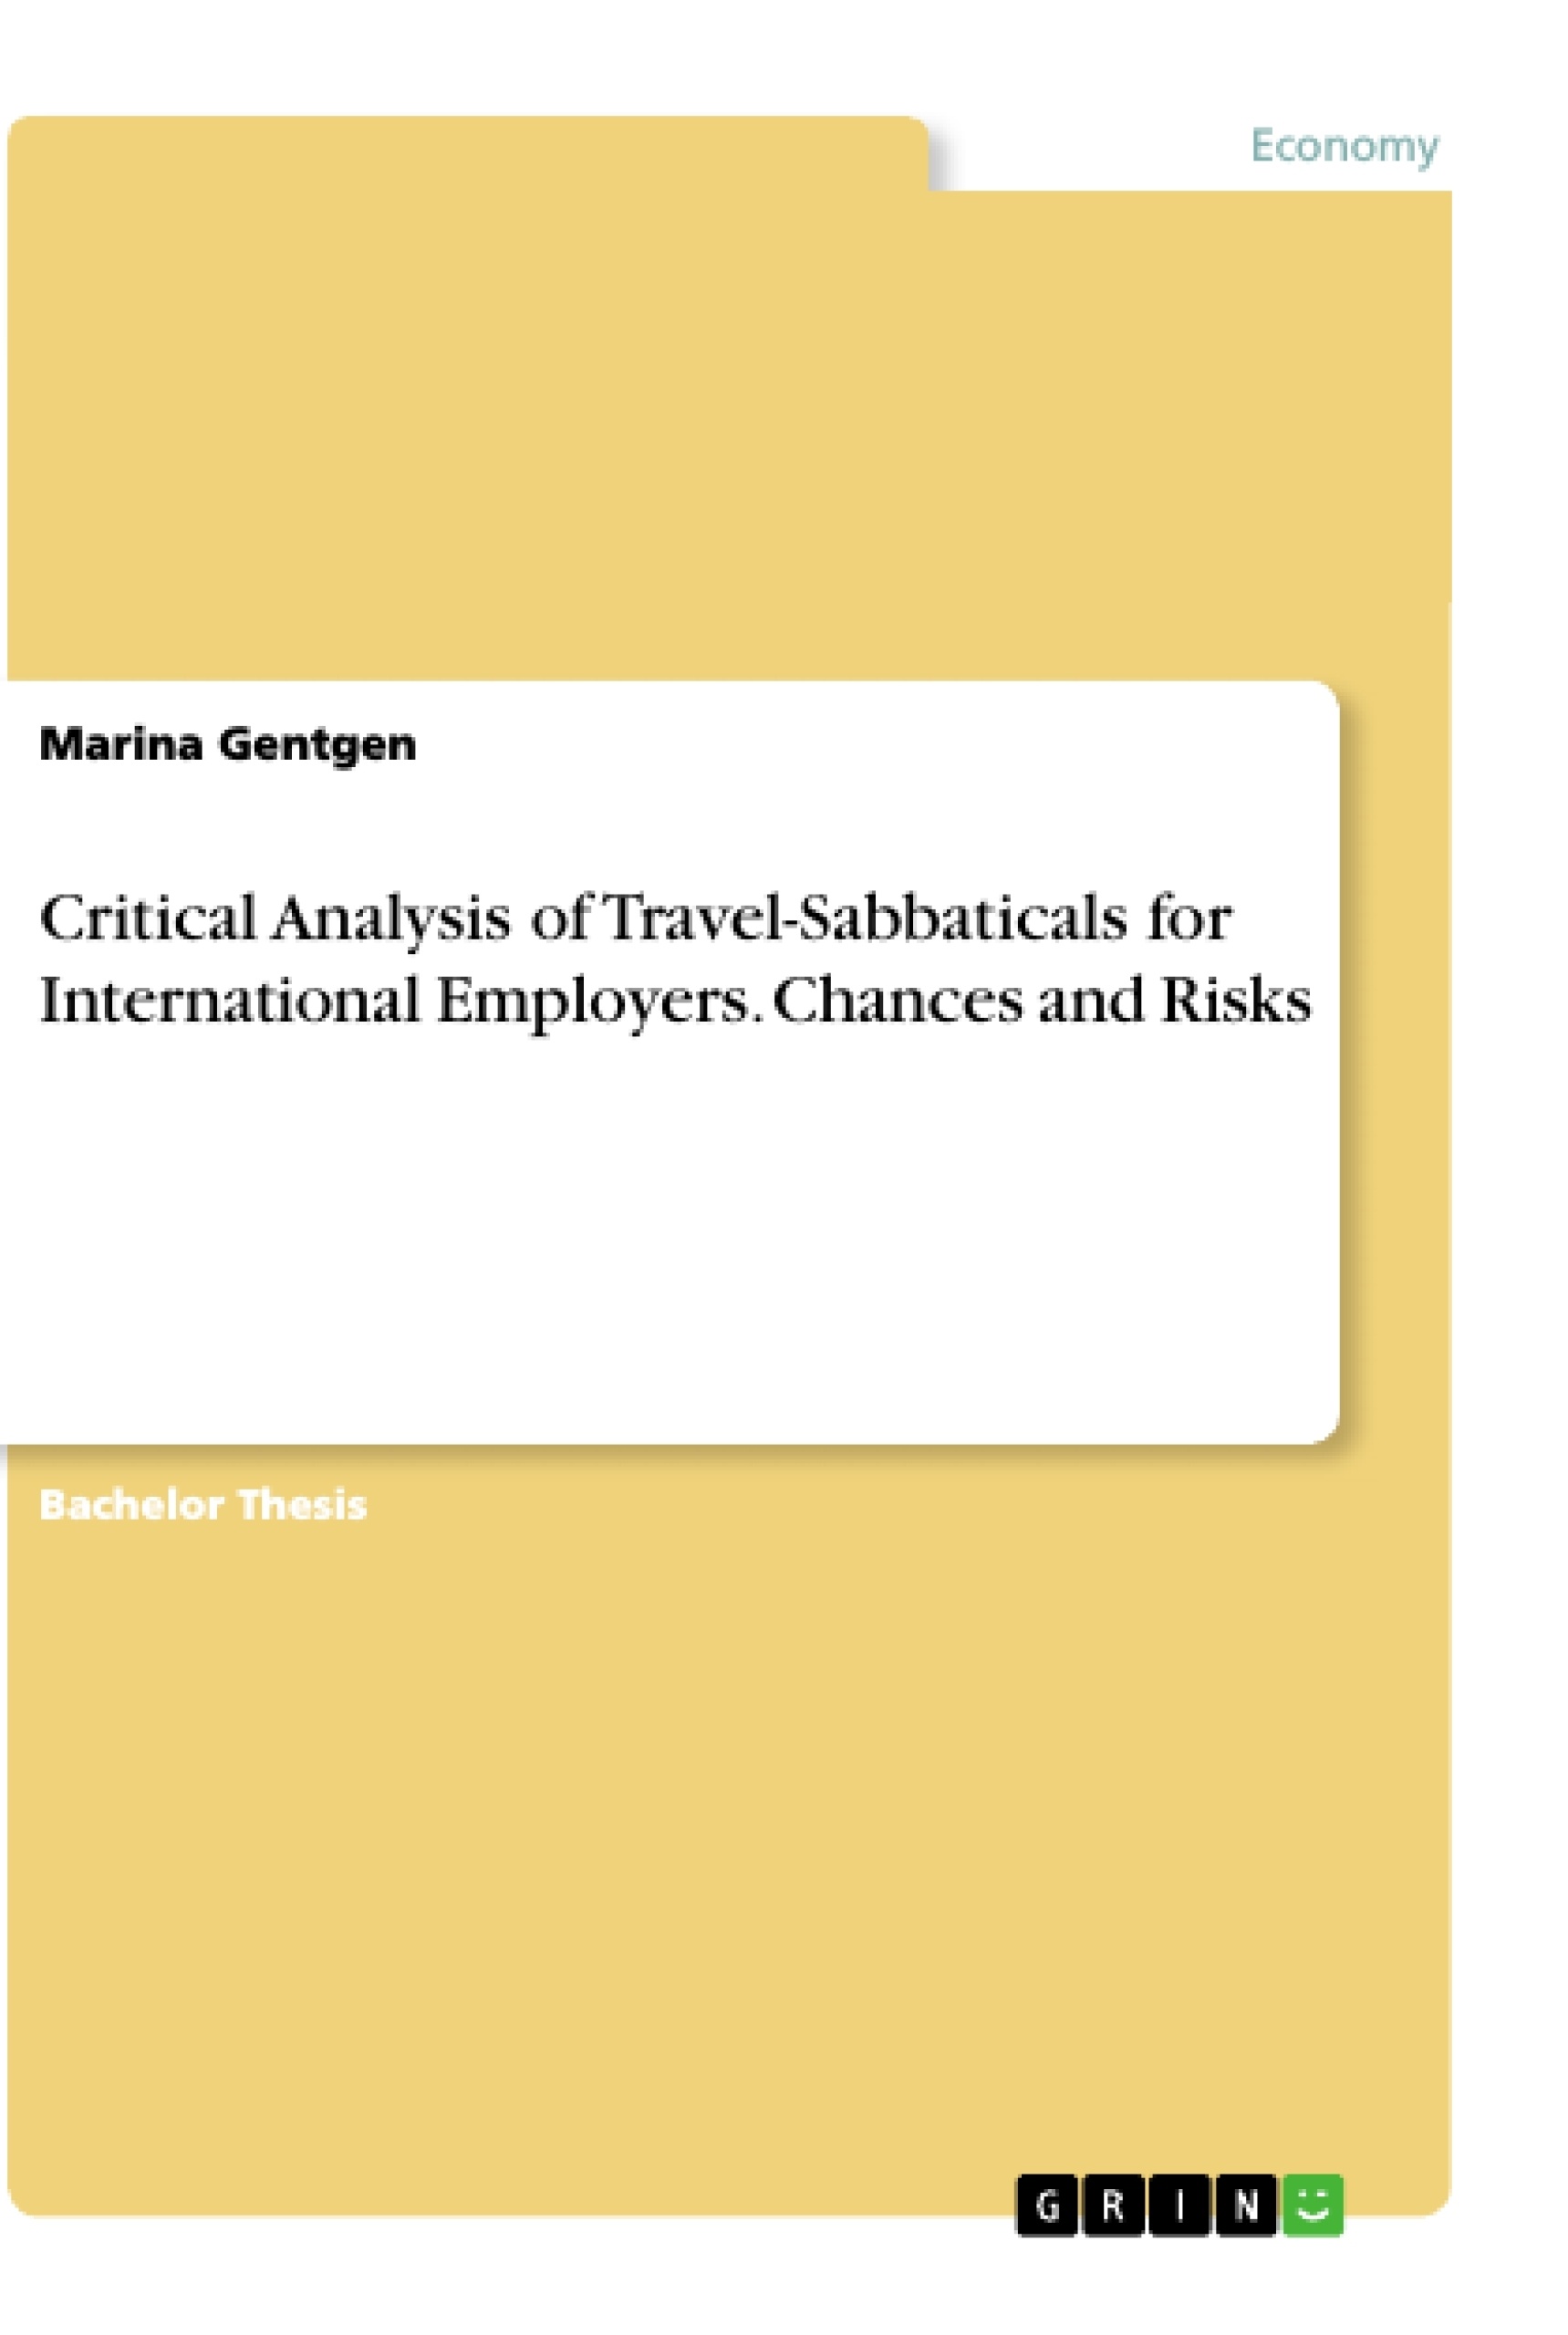 Titre: Critical Analysis of Travel-Sabbaticals for International Employers. Chances and Risks